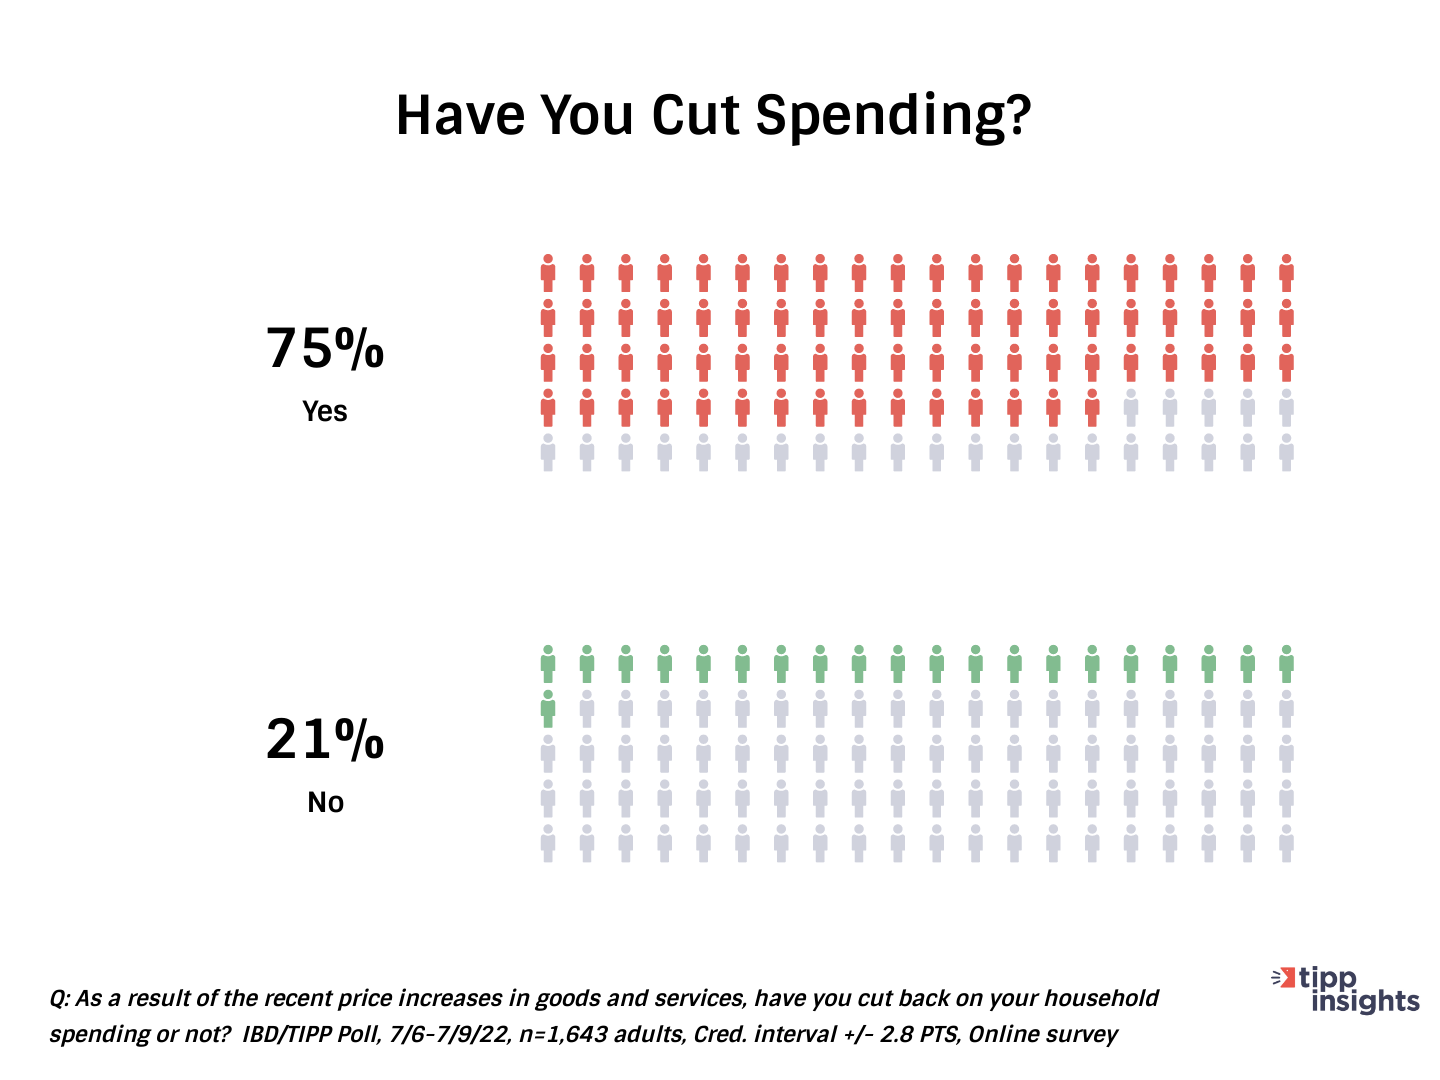 IBD/TIPP Poll results: Have Americans cut spending due to increased prices in goods and services (inflation)